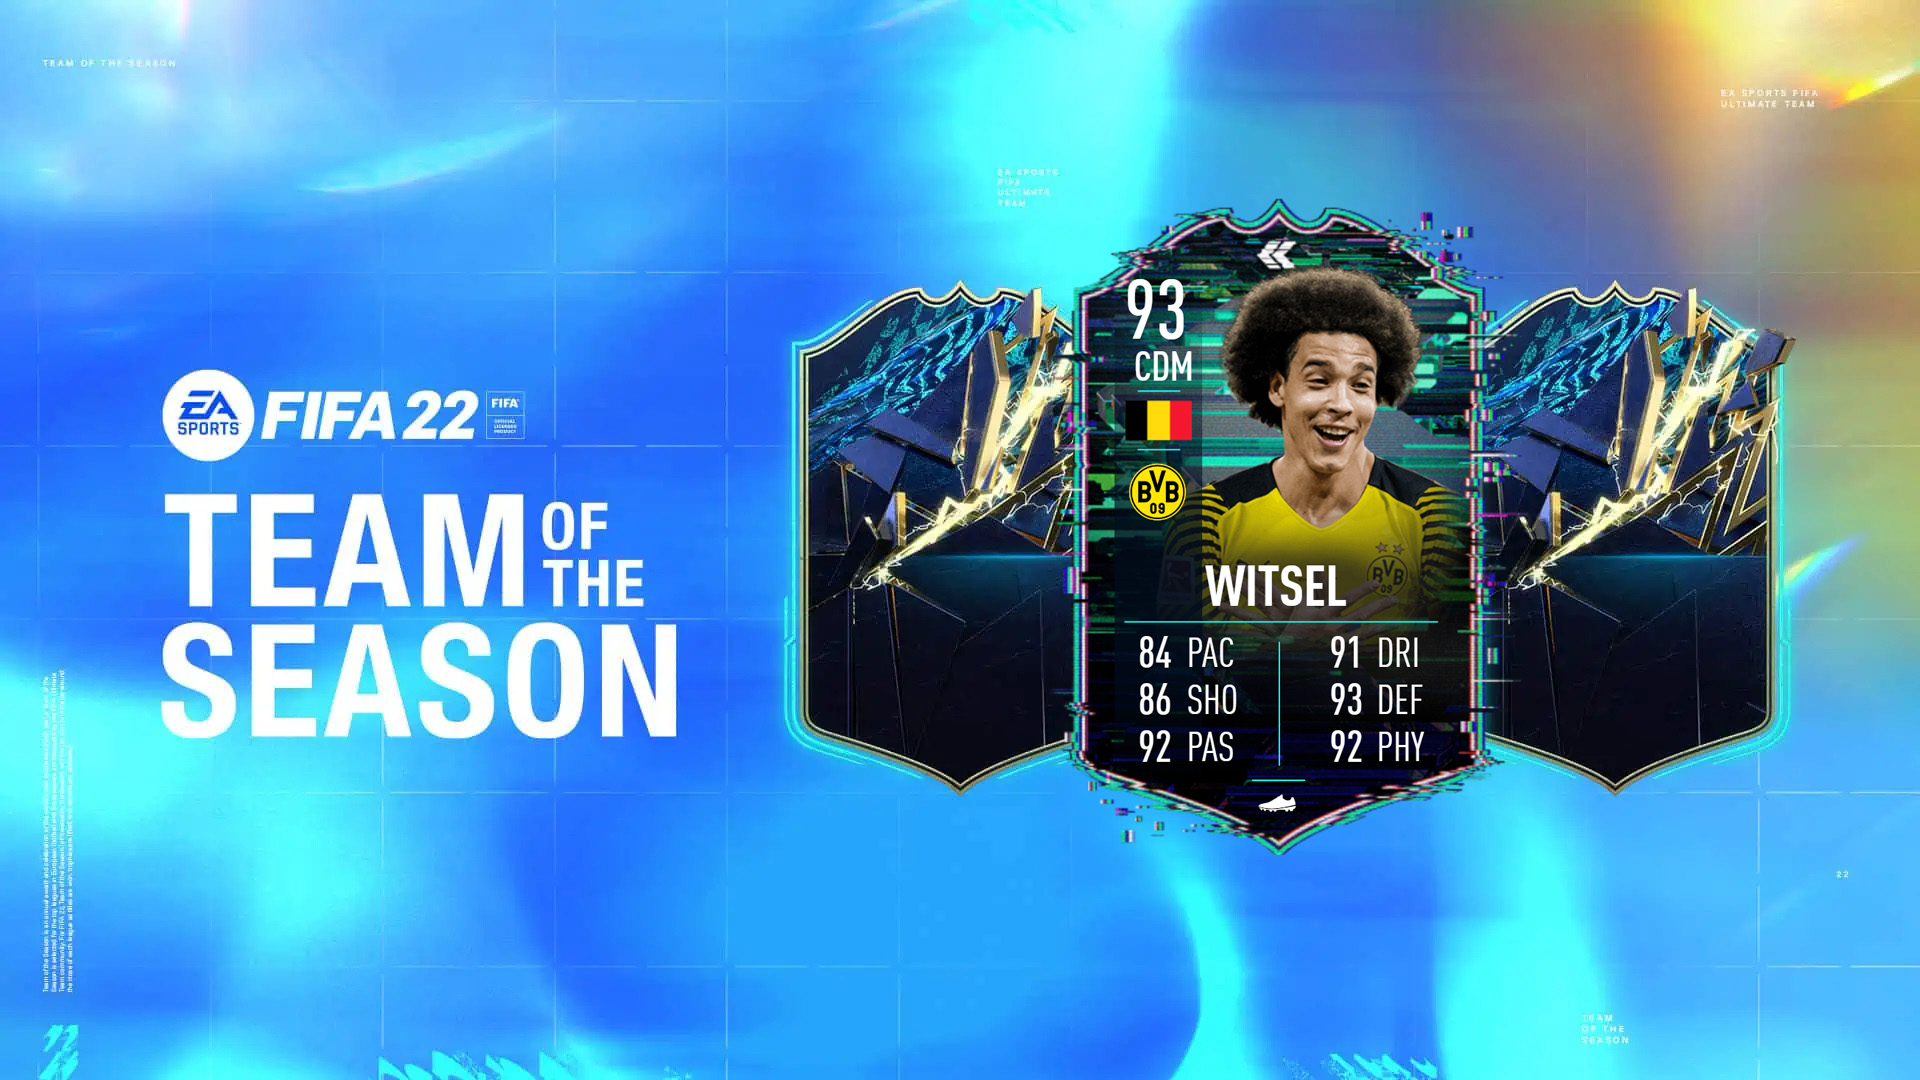 fifa 22 solution dce witsel flashback mini